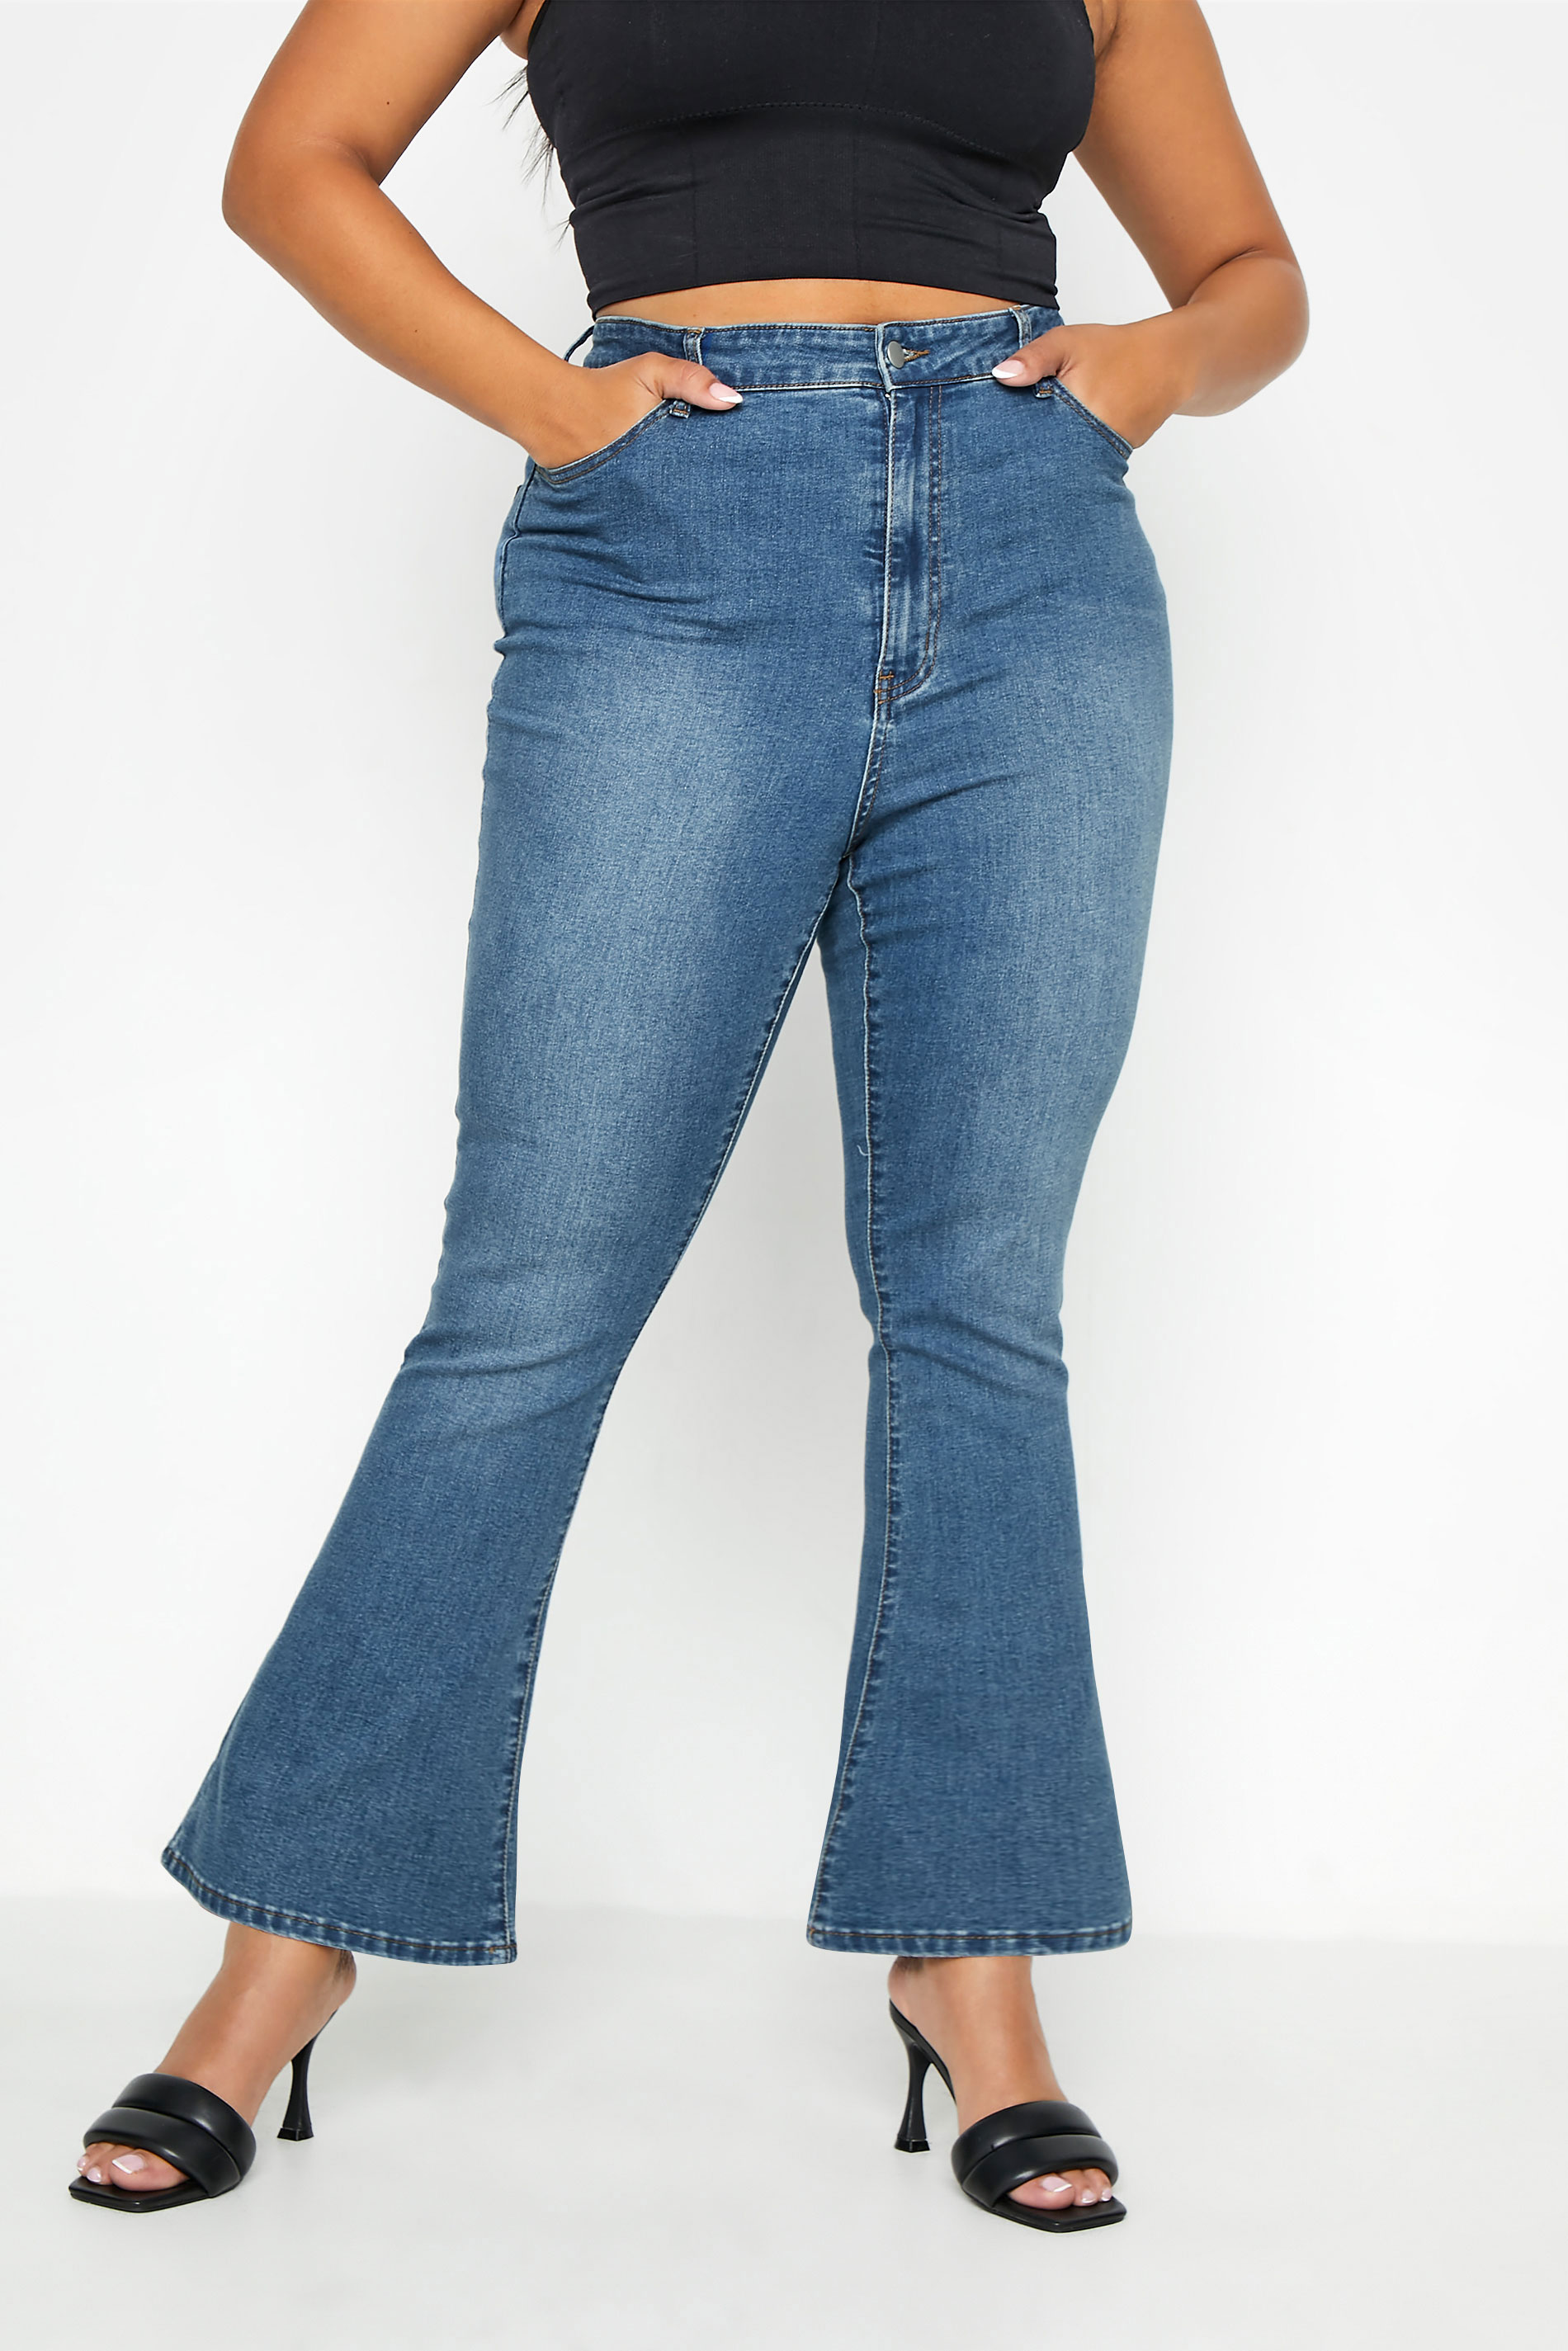 J Brand Denim High-rise Kick-flare Jeans in Orange Womens Clothing Jeans Flare and bell bottom jeans 